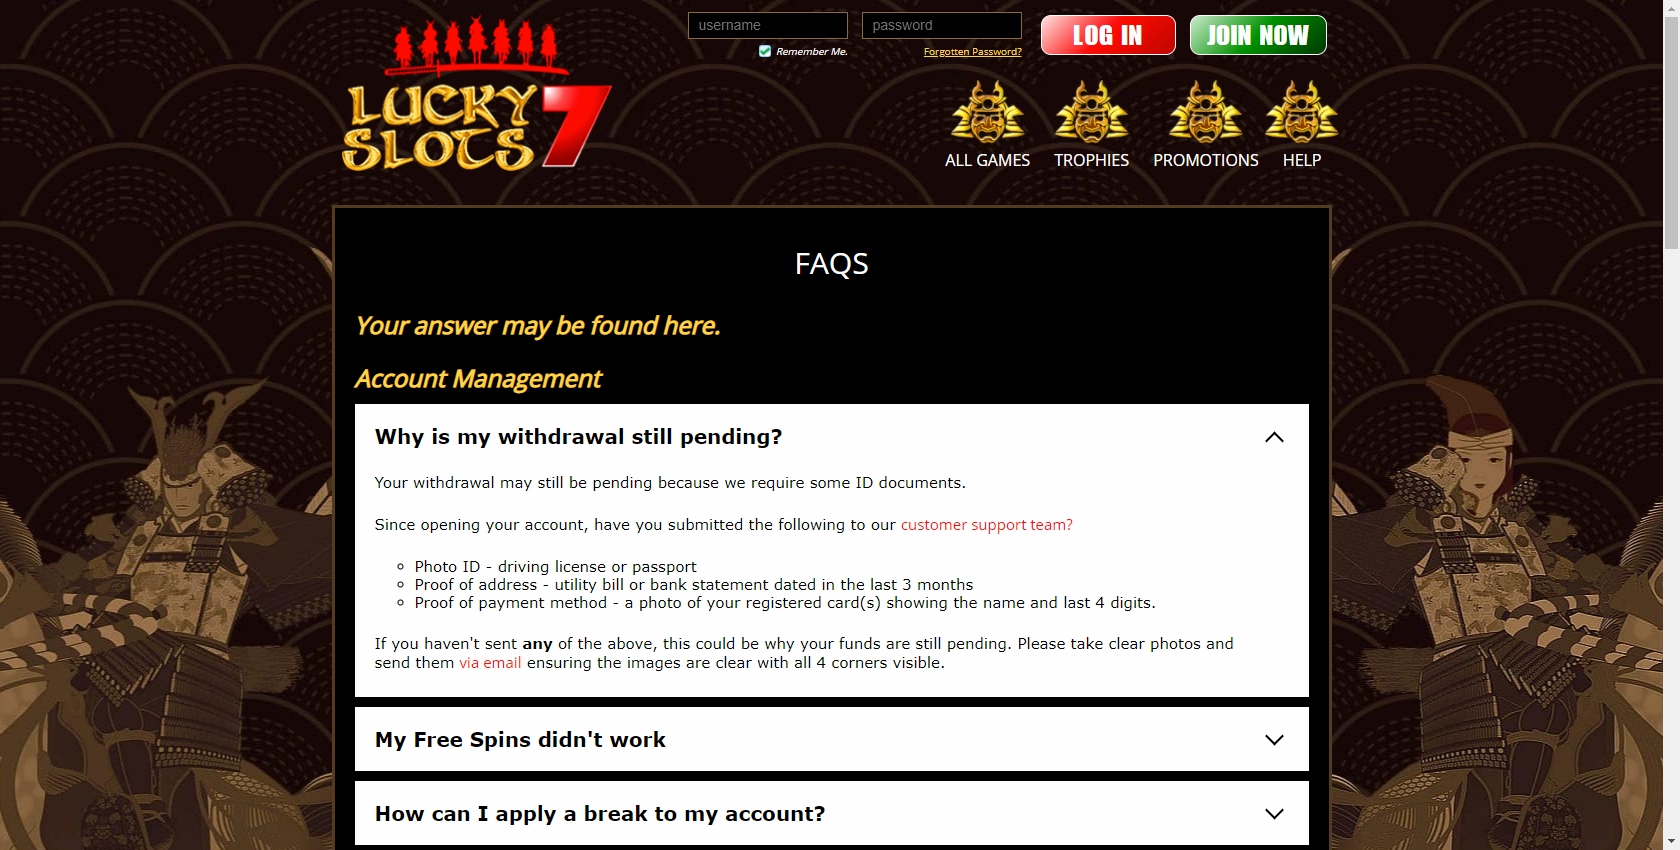 Lucky Slots 7 Casino Support